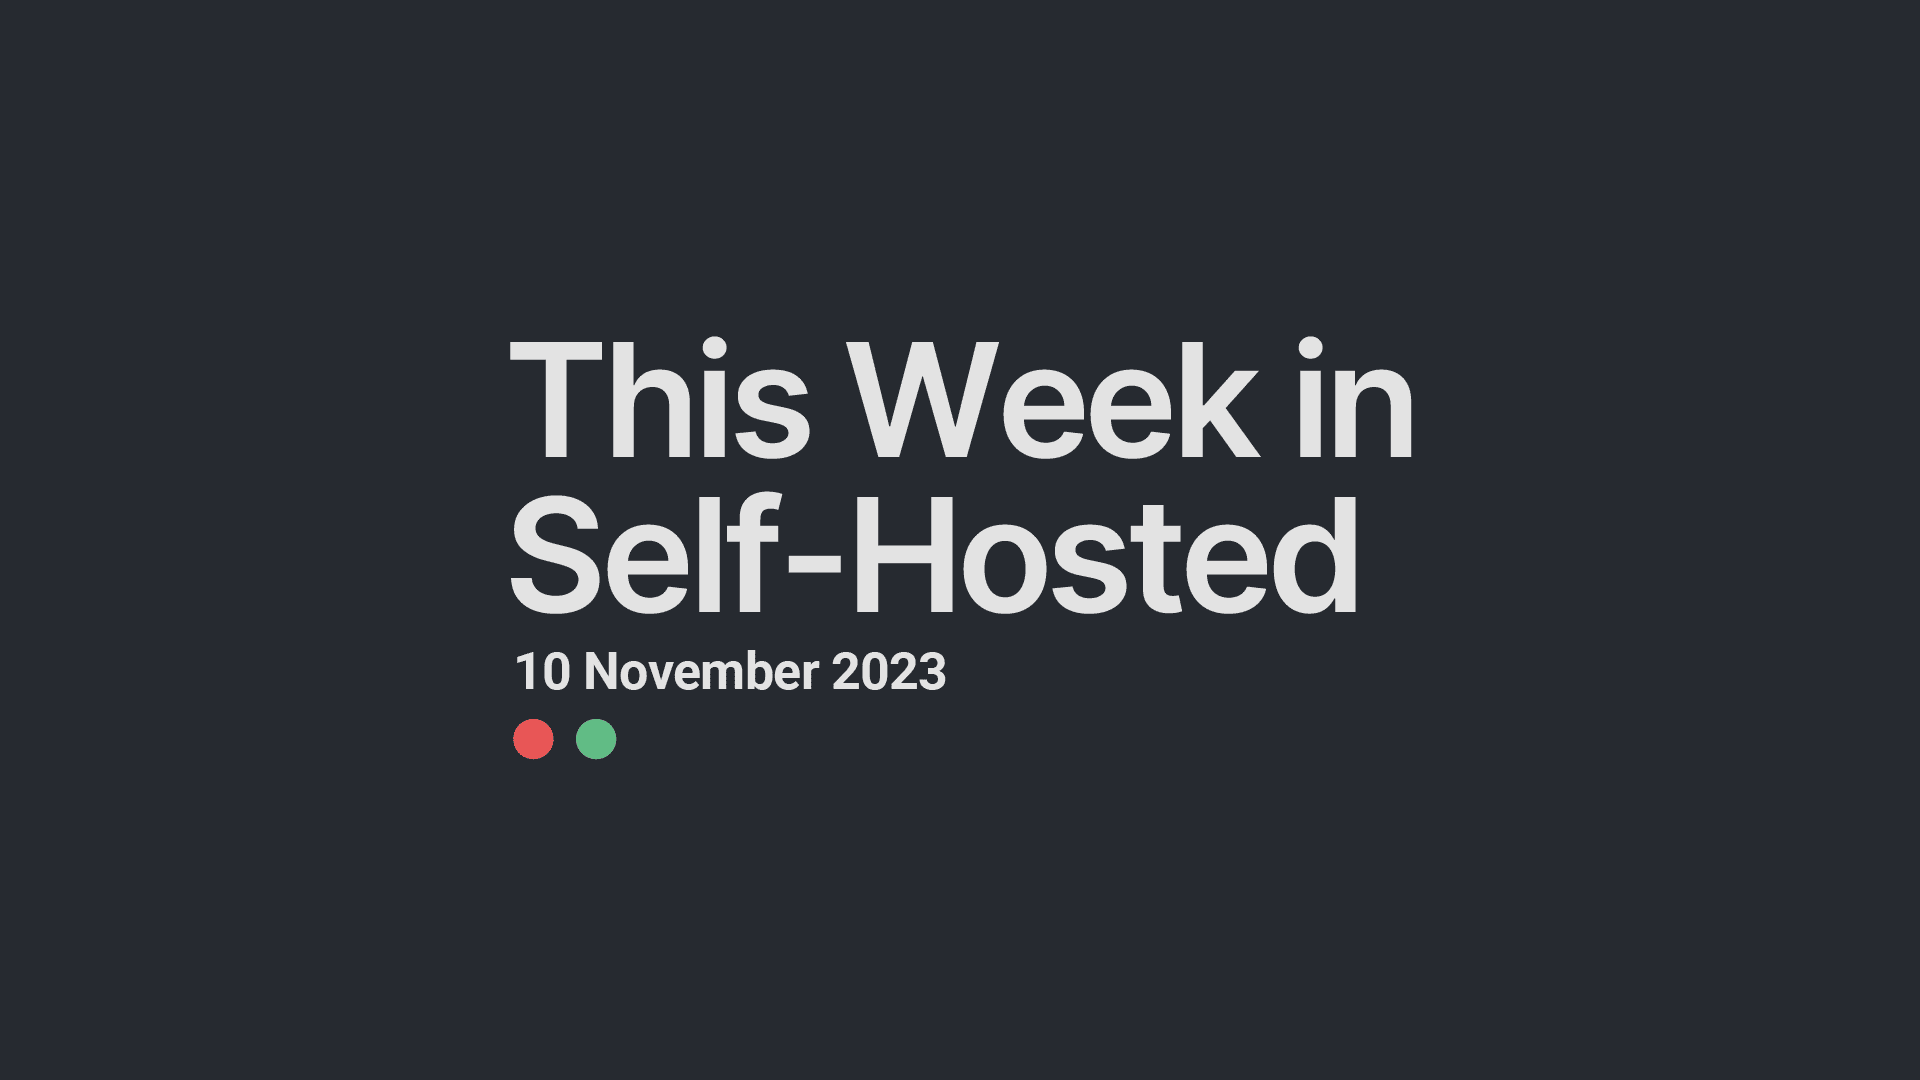 This Week in Self-Hosted (10 November 2023) Post image